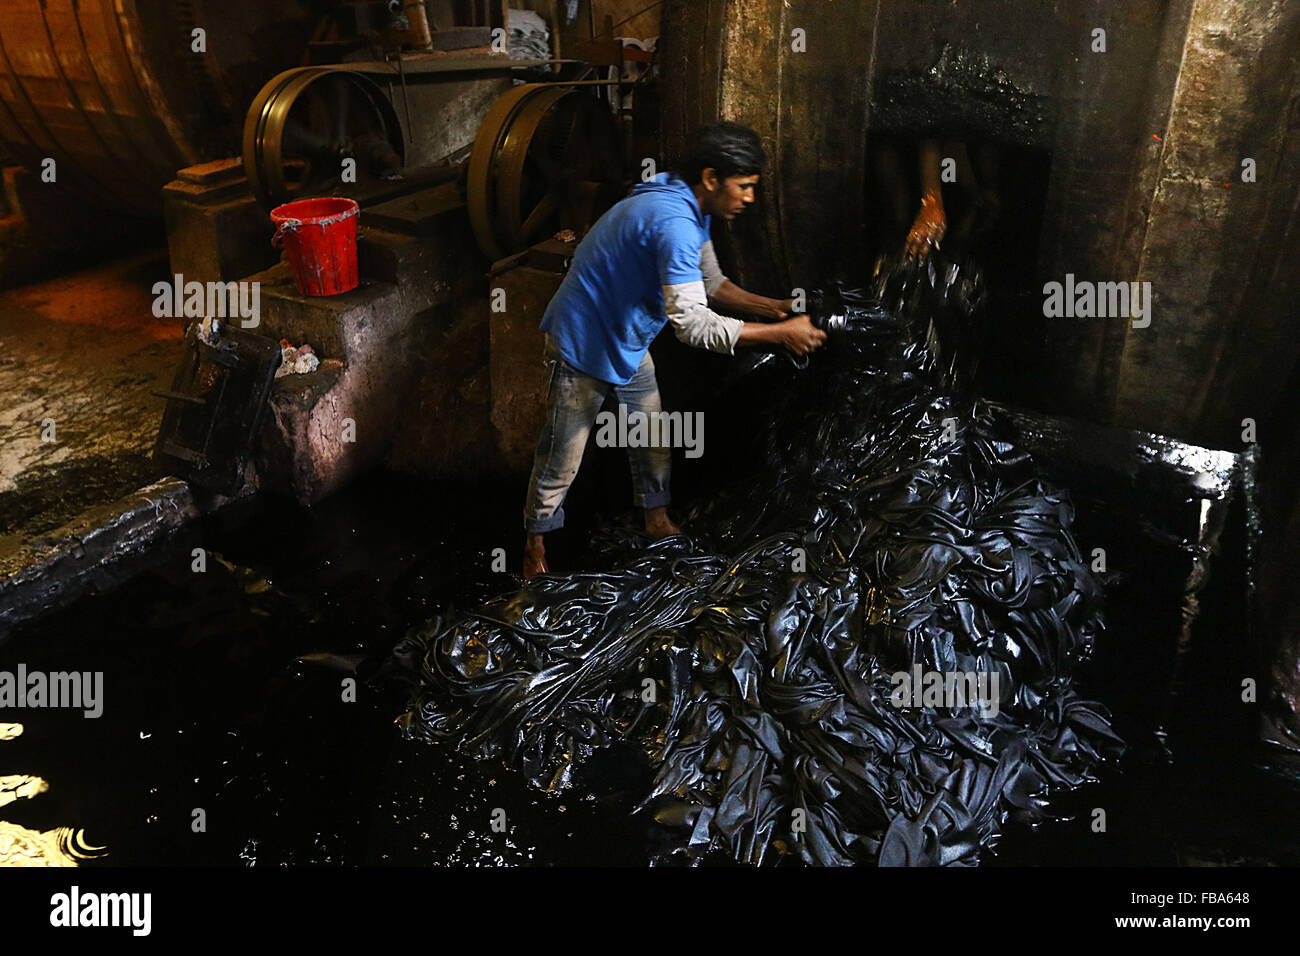 Dhaka 13 January 2016. Workers process animal skins in a Leather factory in Hazaribagh, Dhaka. Tanneries in the city's Hazaribagh area discharge 30000 square meters of liquid waste everyday. The tanneries discharge the effluents into the river system causing a large area of acid sludge..The Bangladeshi leather industry has earned 980.67 million US dollar from the exports of leather and leather goods in fiscal 2012/2013, according to Bangladesh's Export Promotion Bureau. Stock Photo